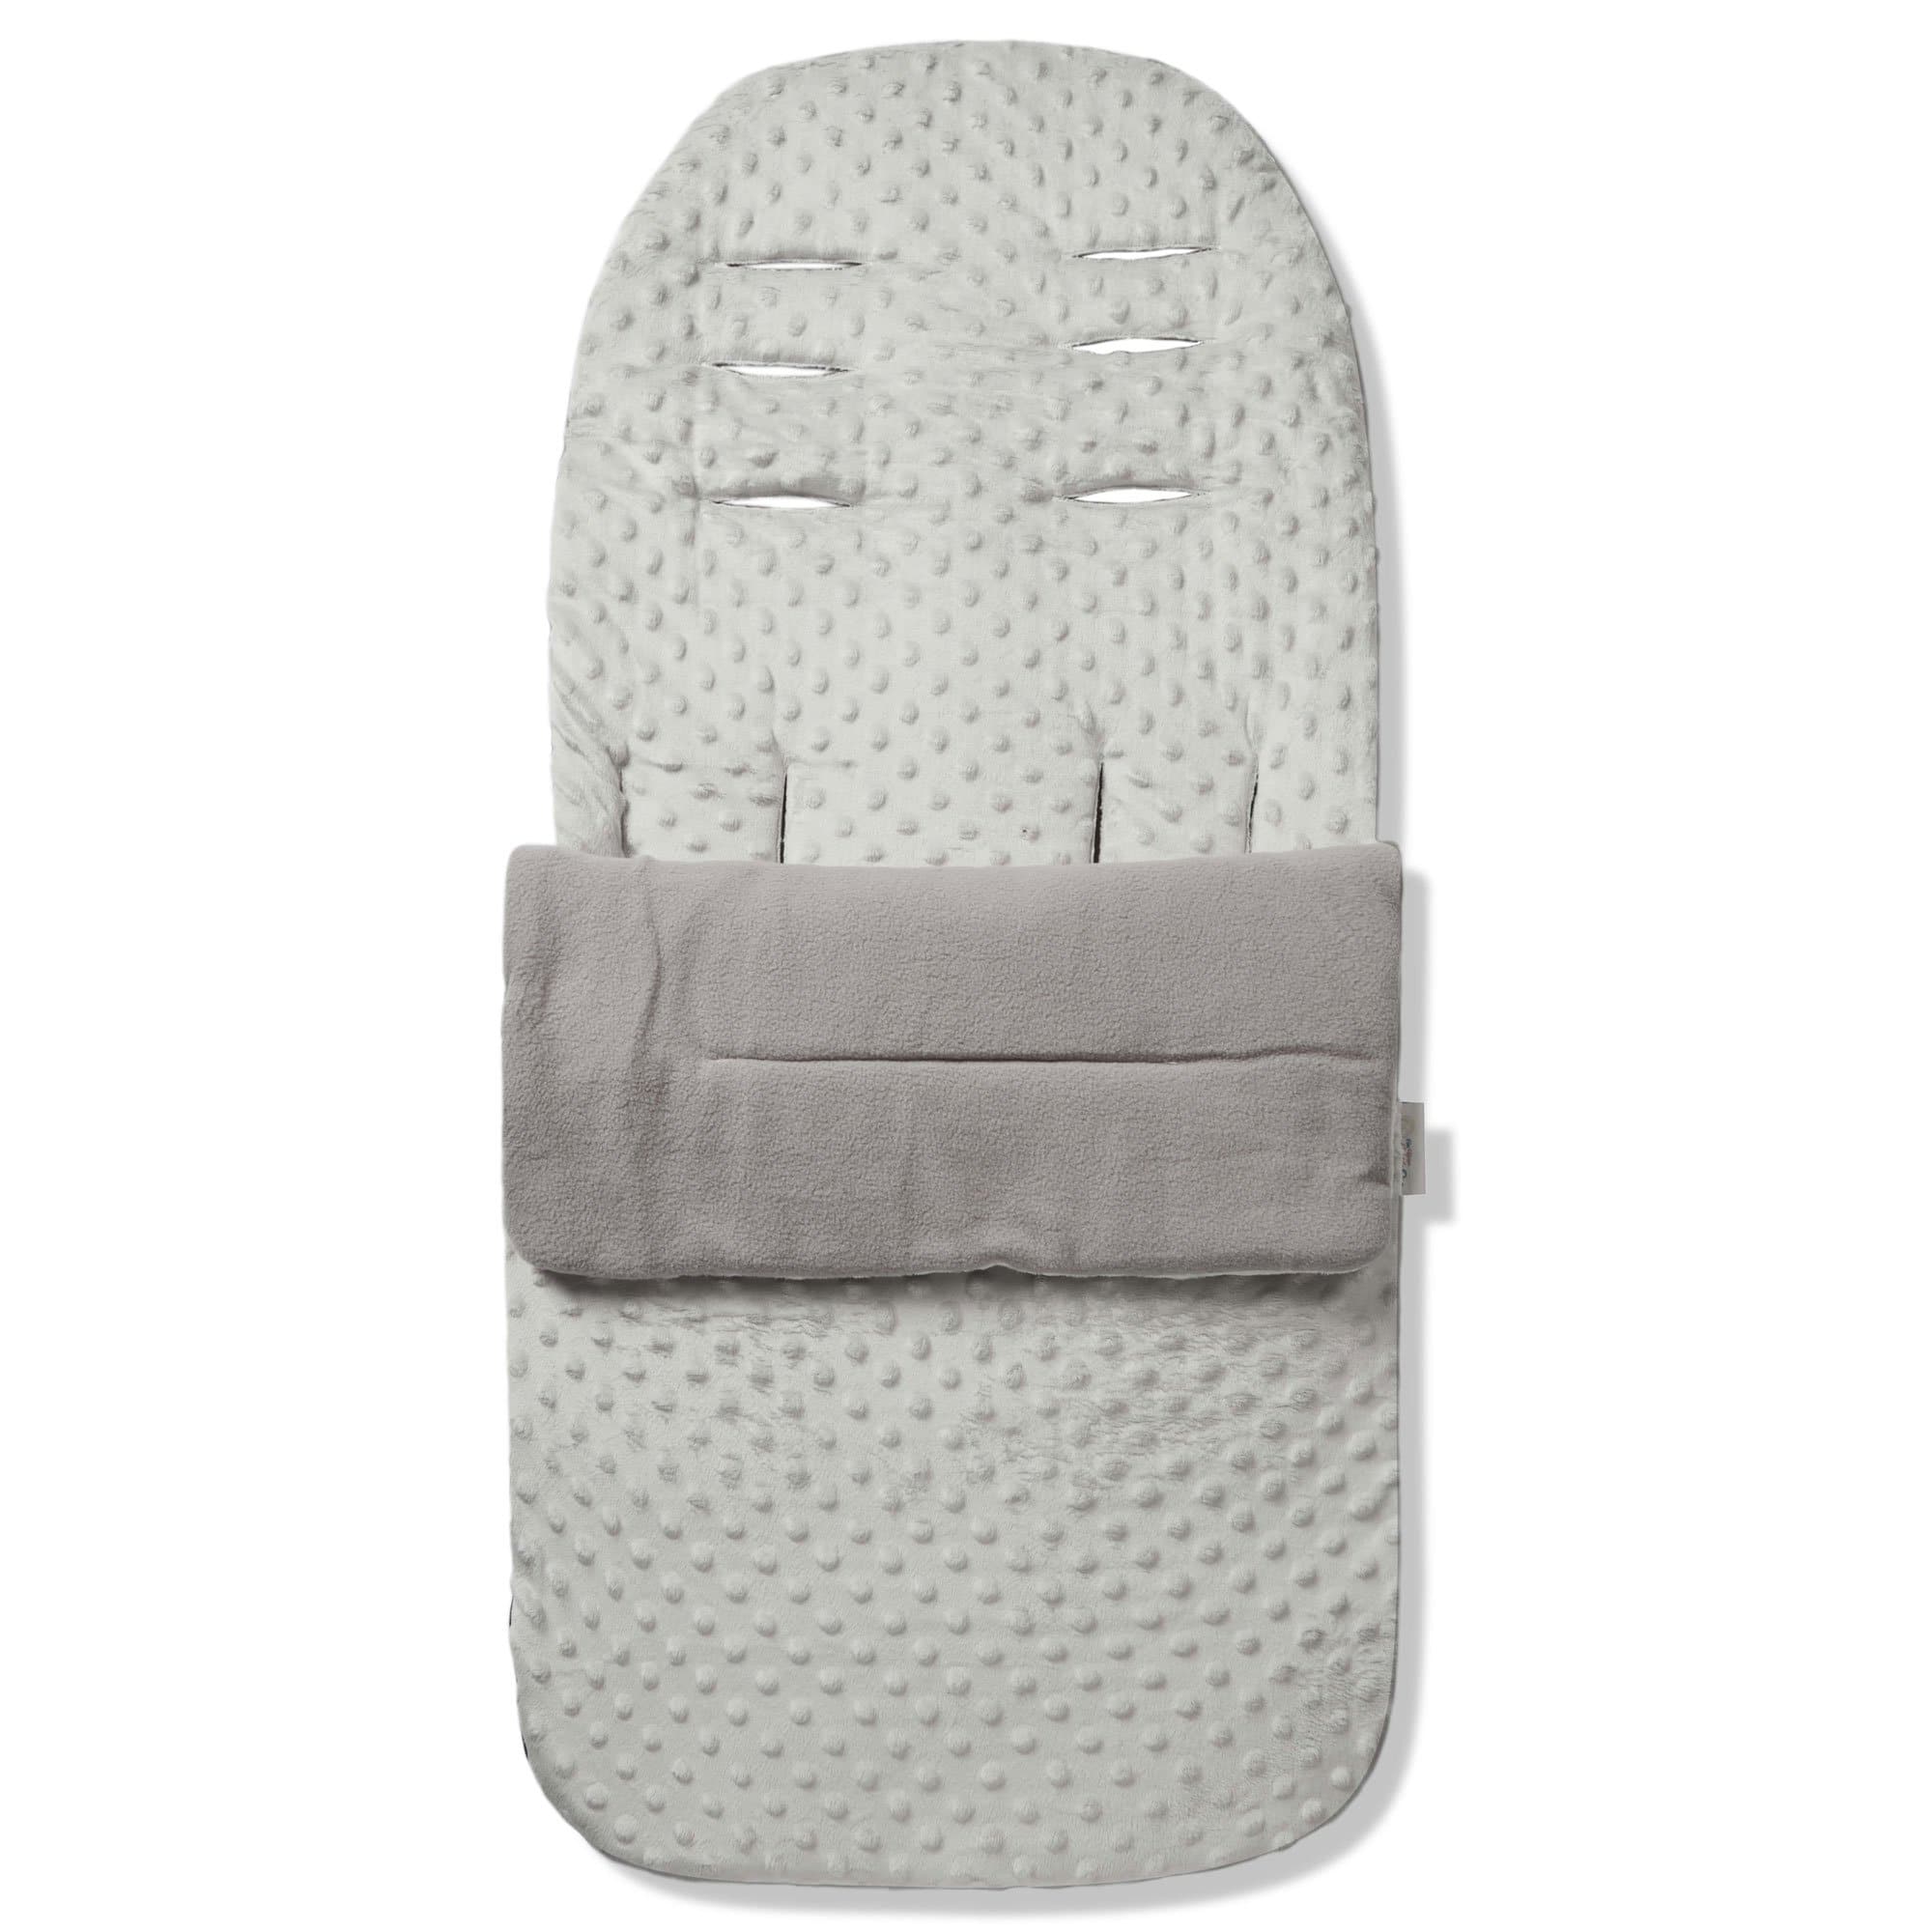 Dimple Footmuff / Cosy Toes Compatible with Phil & Teds - Grey / Fits All Models | For Your Little One